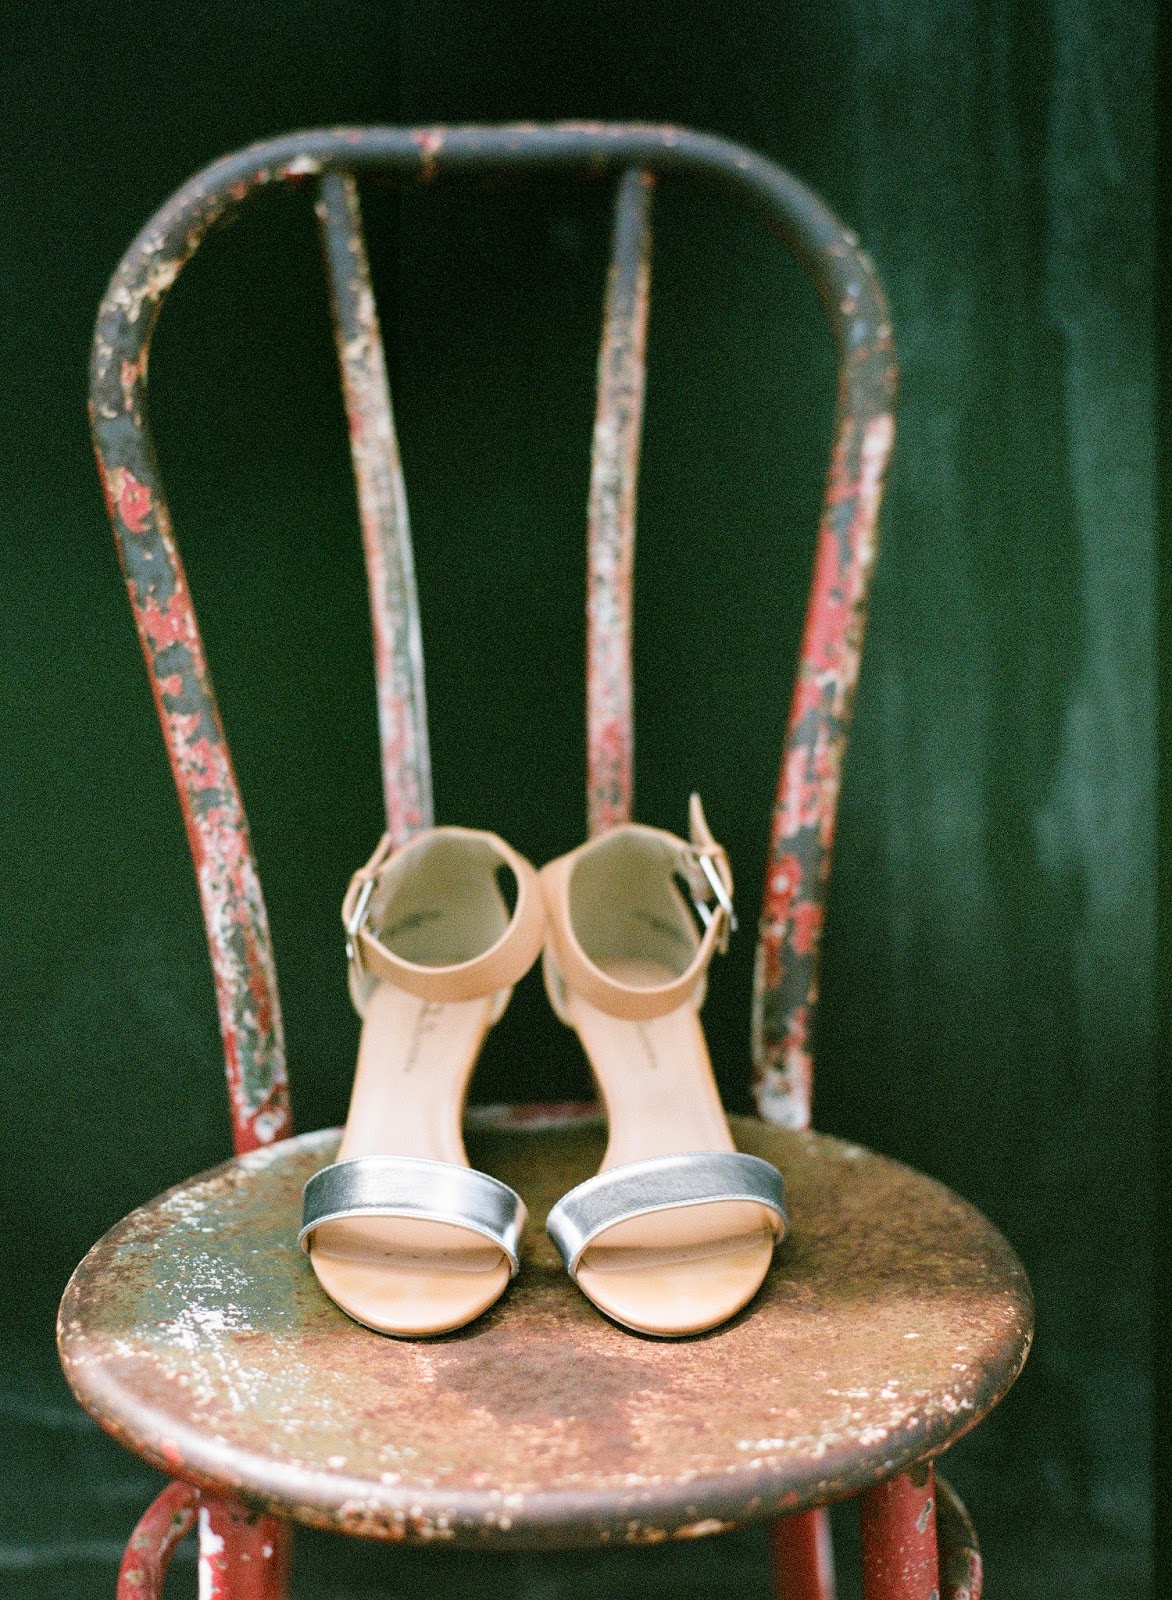 minimal silver wedding shoes on an antique chair with a green backdrop on a brooklyn, new york rooftop